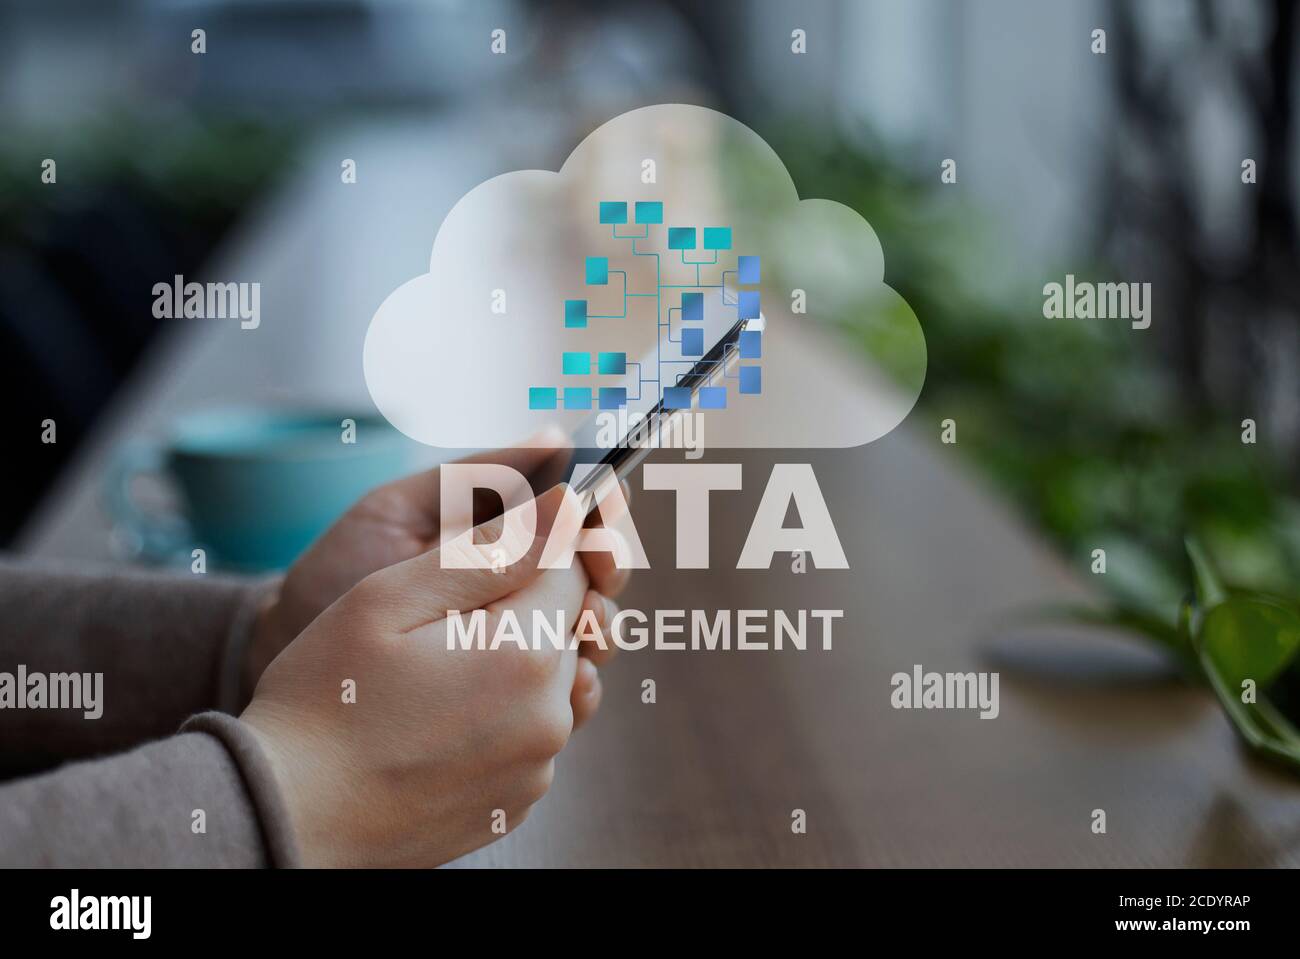 Data Management Concept. Collage With Woman Using Smartphone And Information Storage Cloud Stock Photo